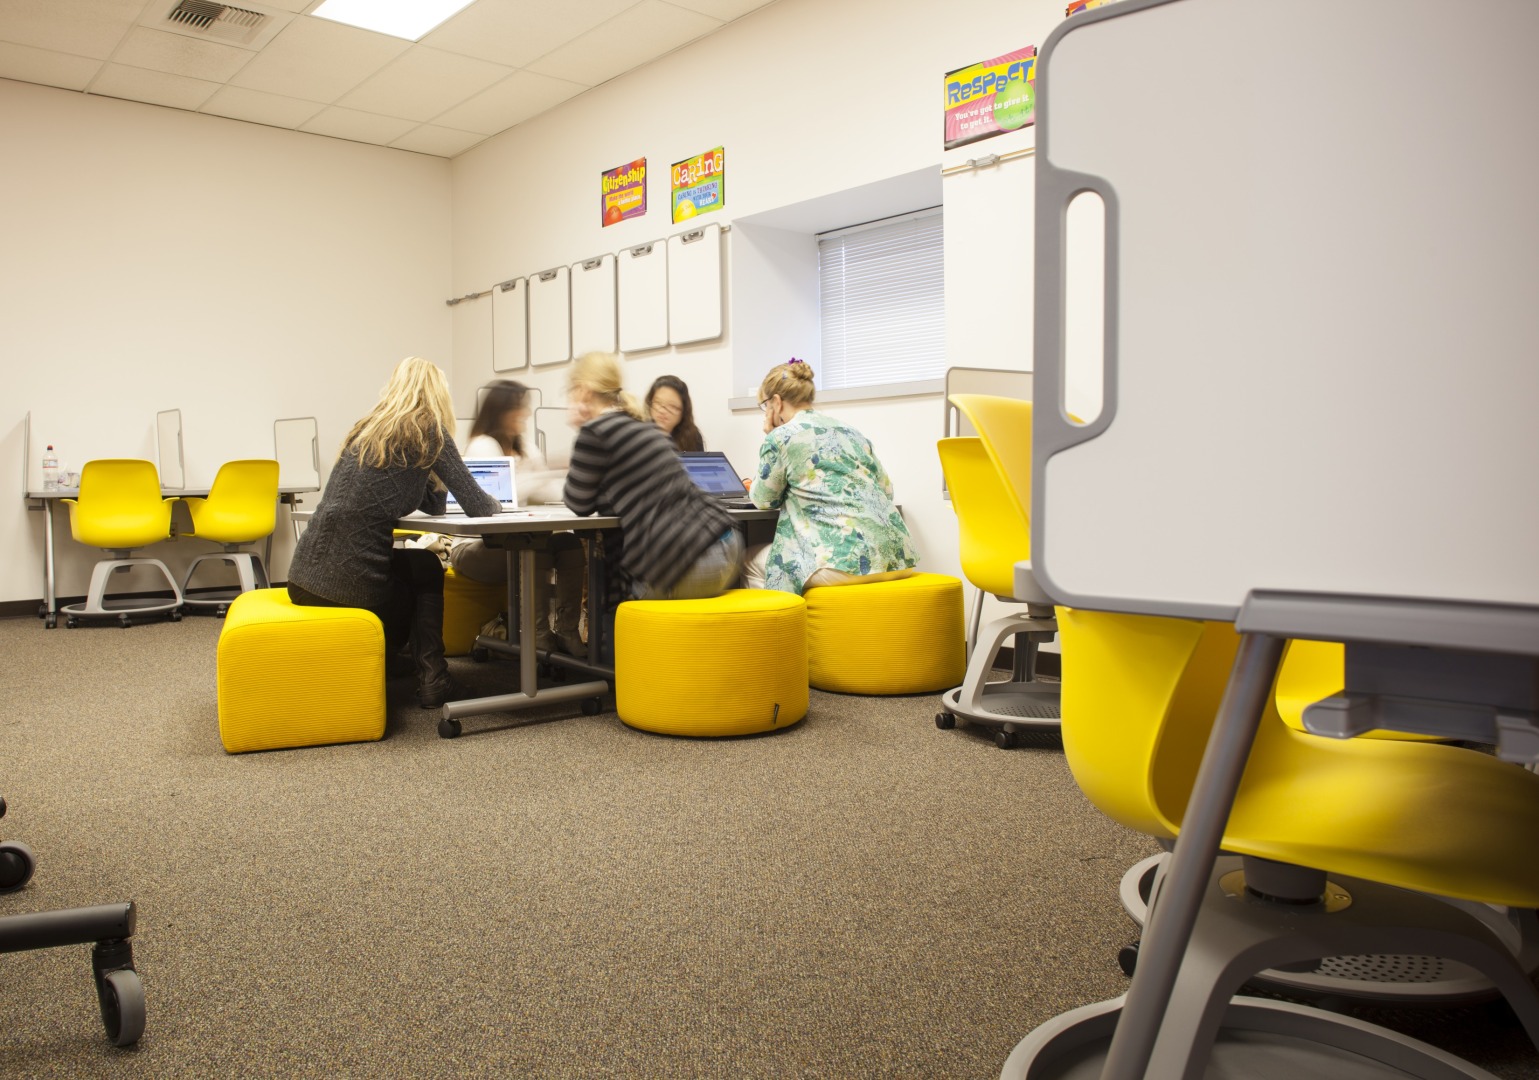 A Milpitas USD Spangler Learning Center Classroom shows the work of architectural design consultants.